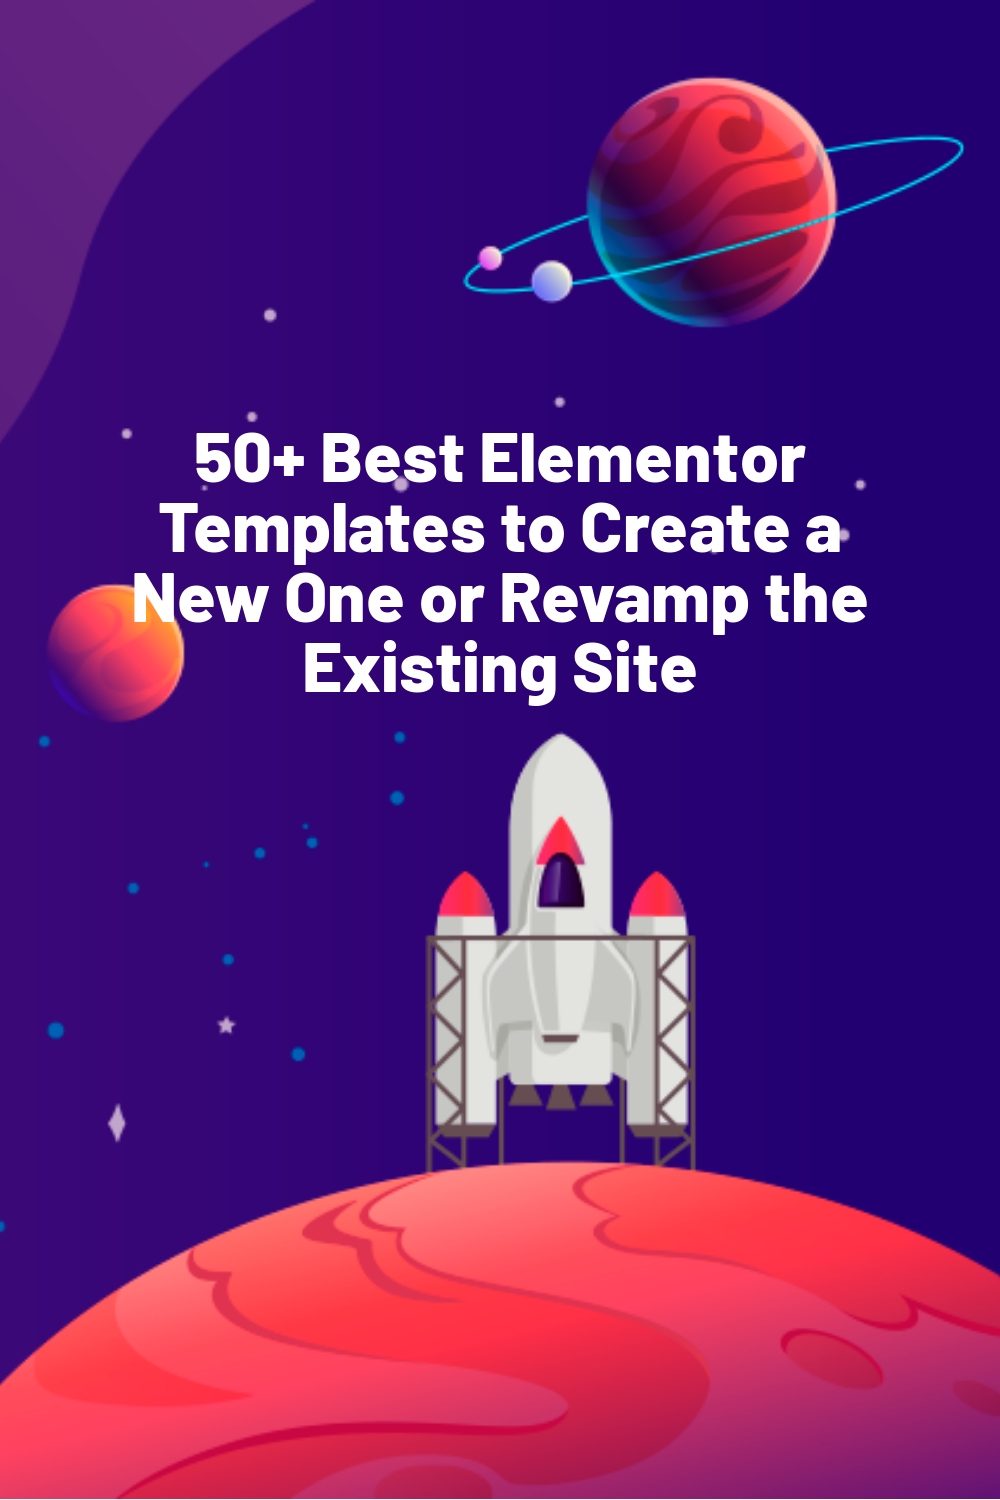 50+ Best Elementor Templates to Create a New One or Revamp the Existing Site